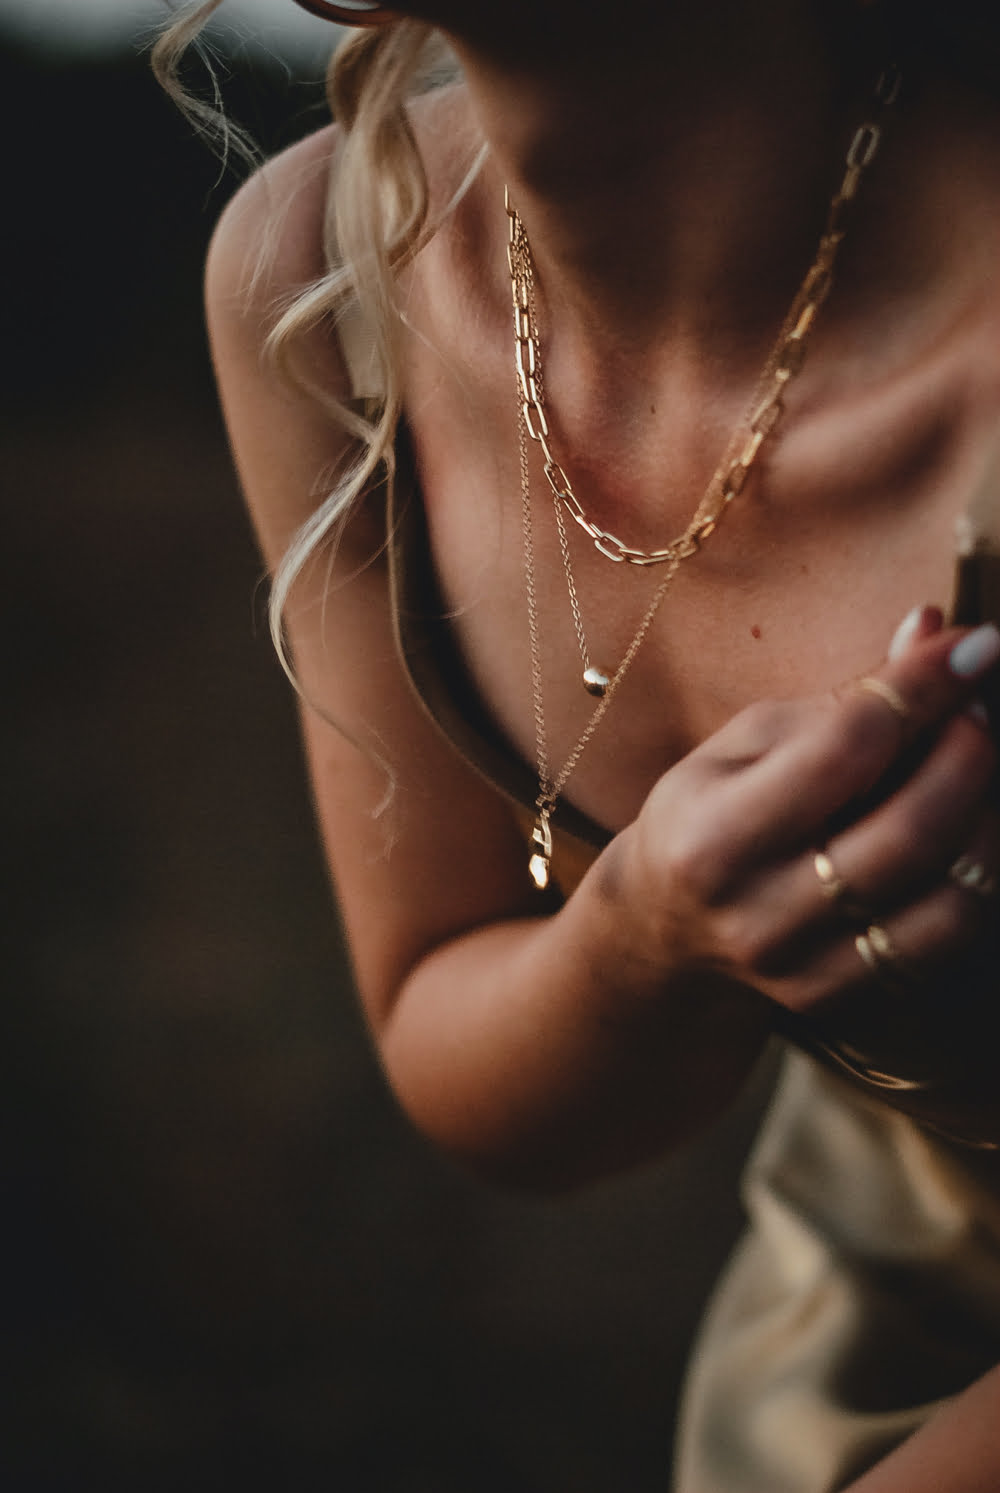 Girl with gold chains, pendants, and rings